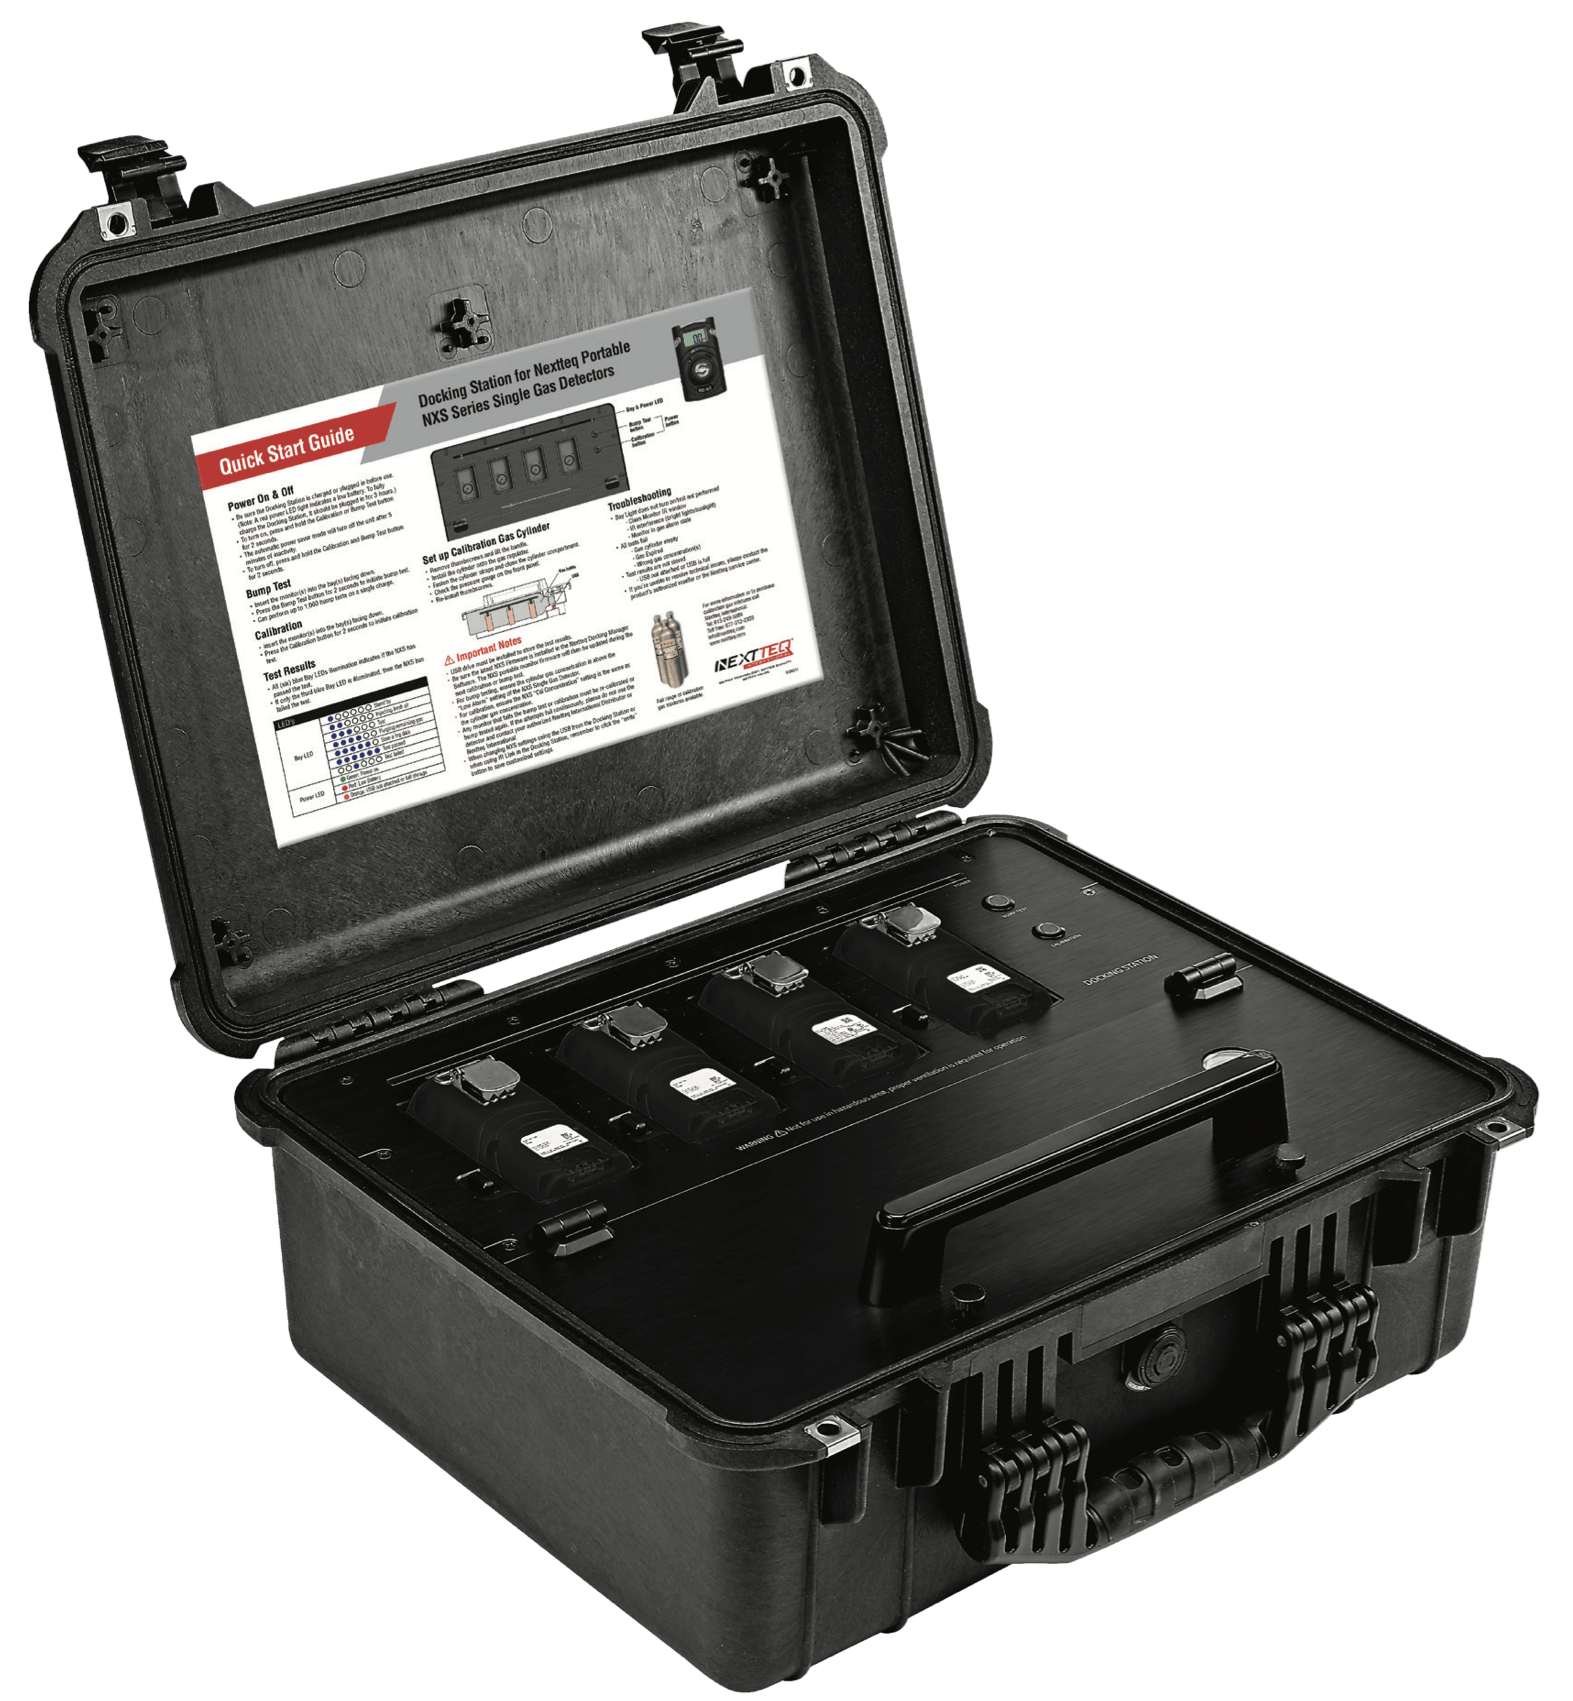 A Nextteq® NXM Docking station which allows communication with up to 4 portable NXM Multi Gas Detectors.